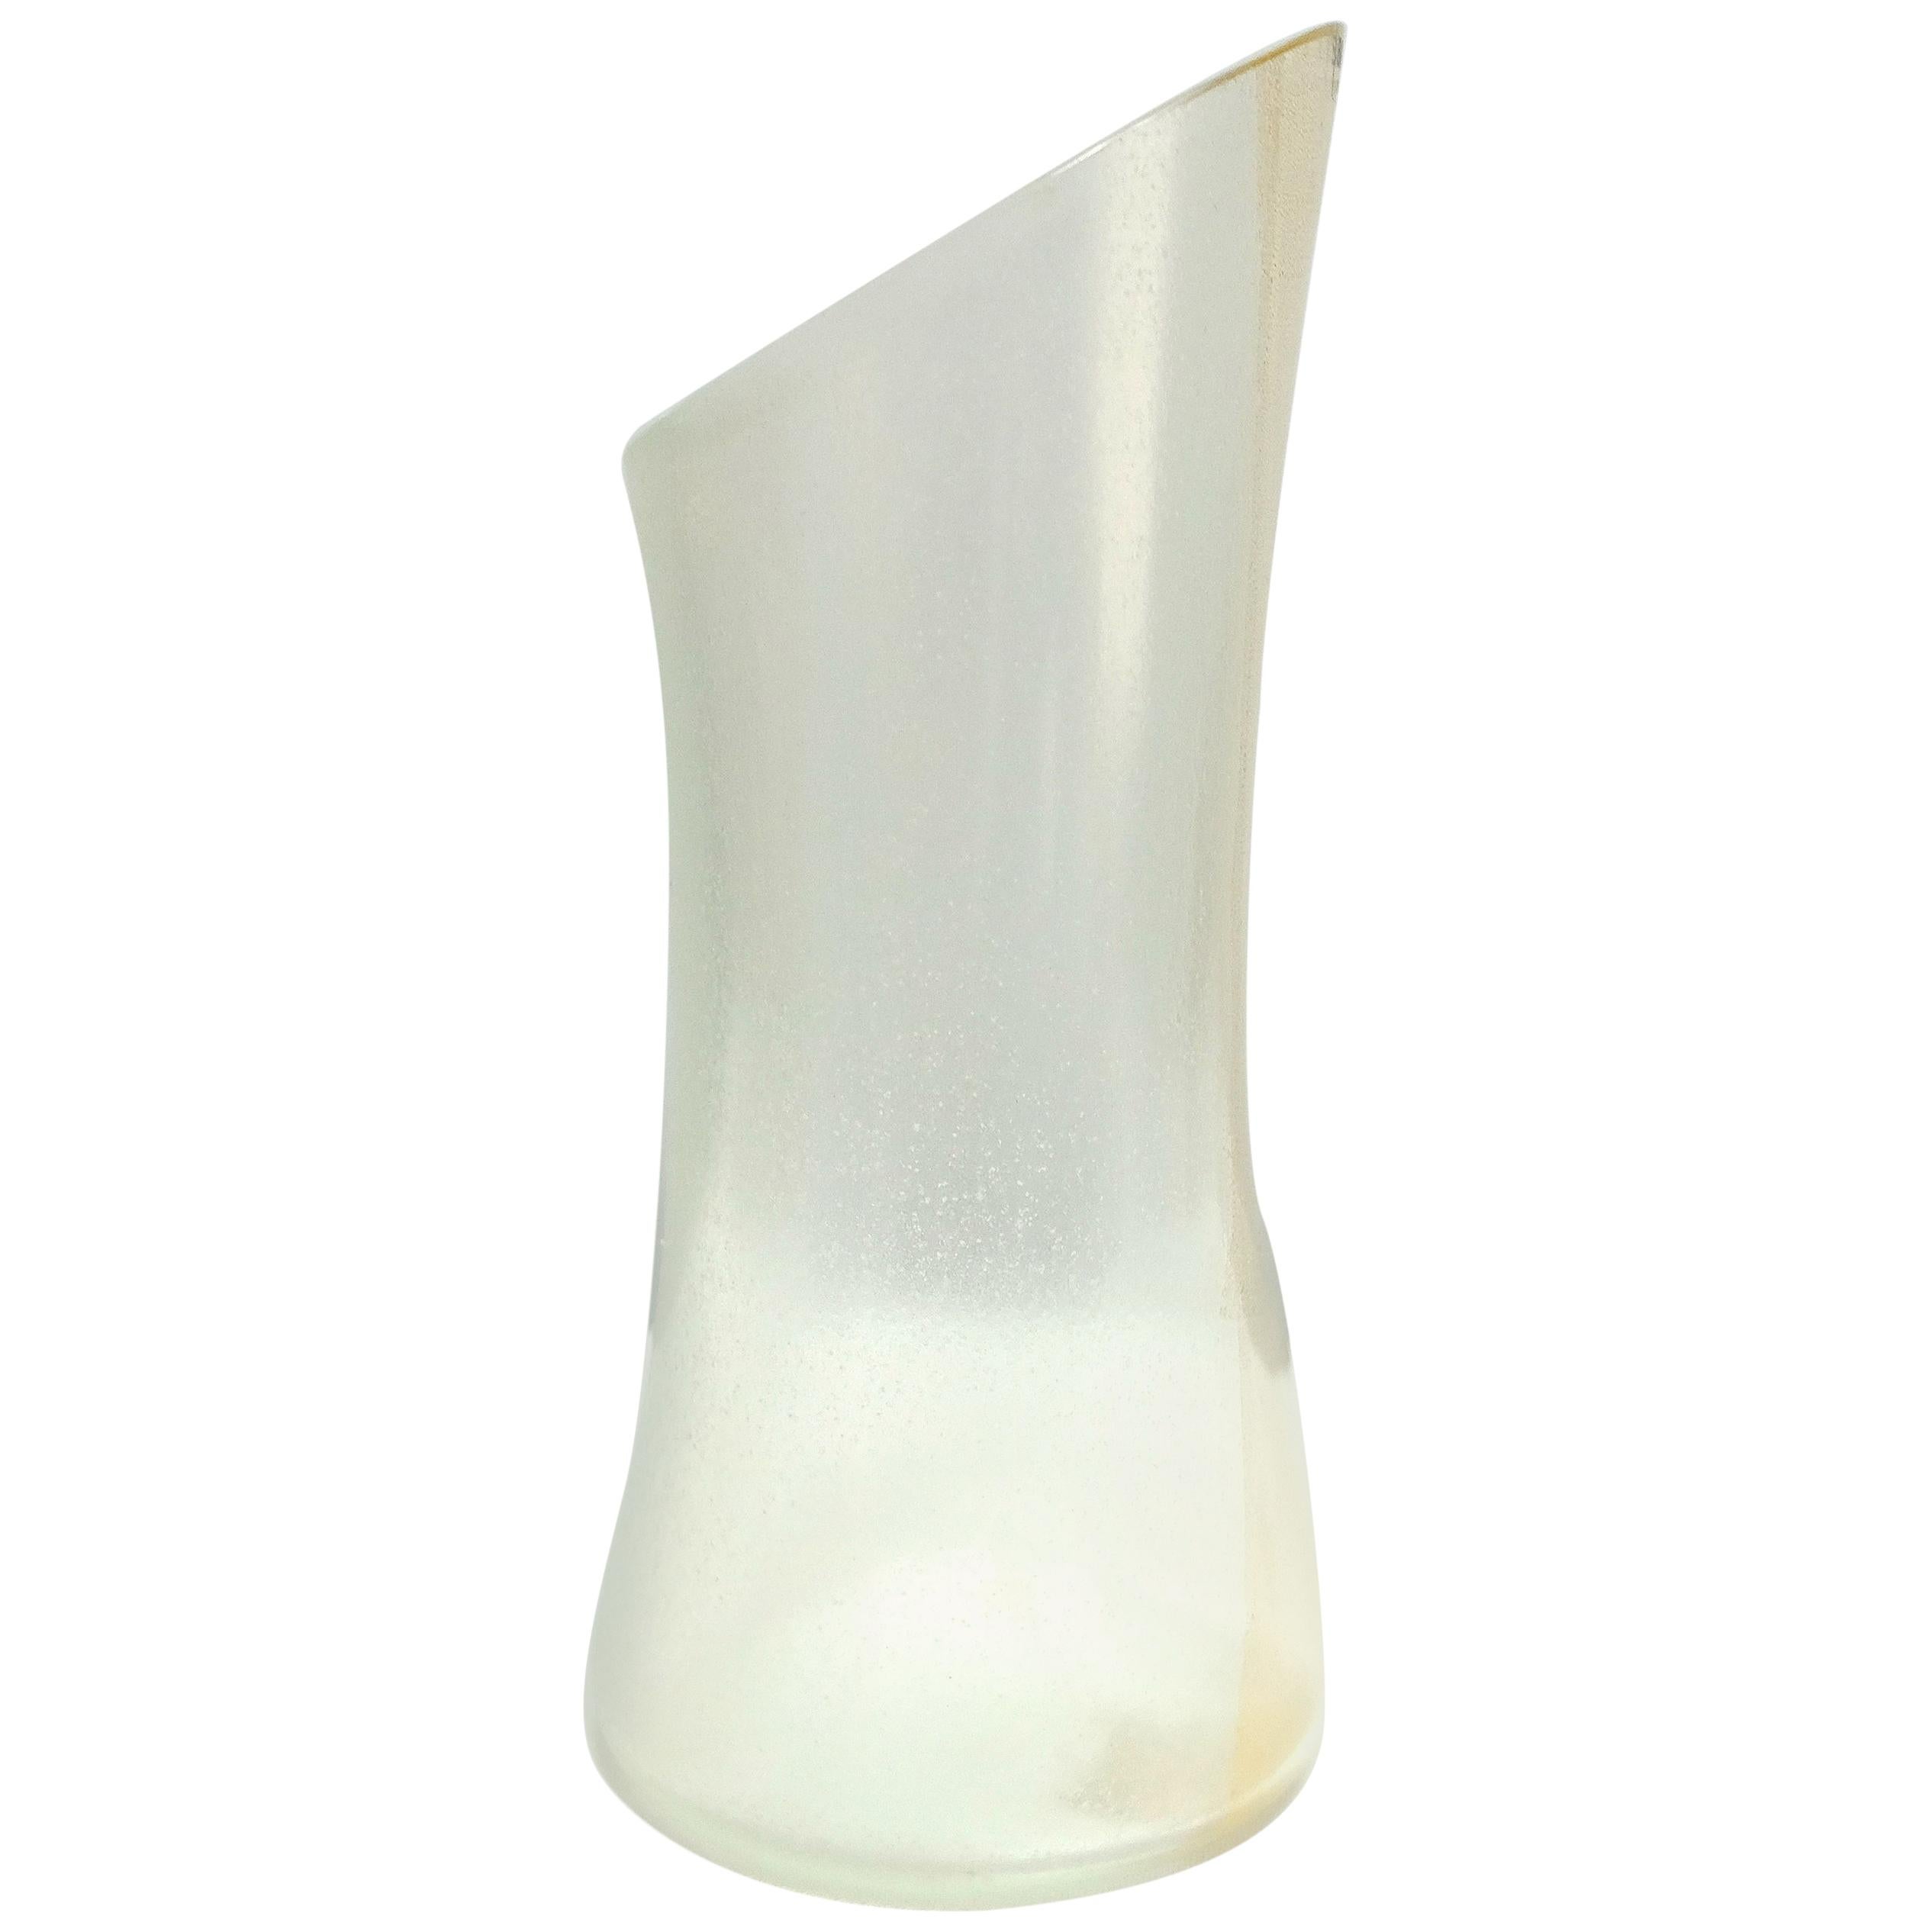  Murano Glass Vase with Infused Gold by Barbini, Italy, Asymmetric For Sale